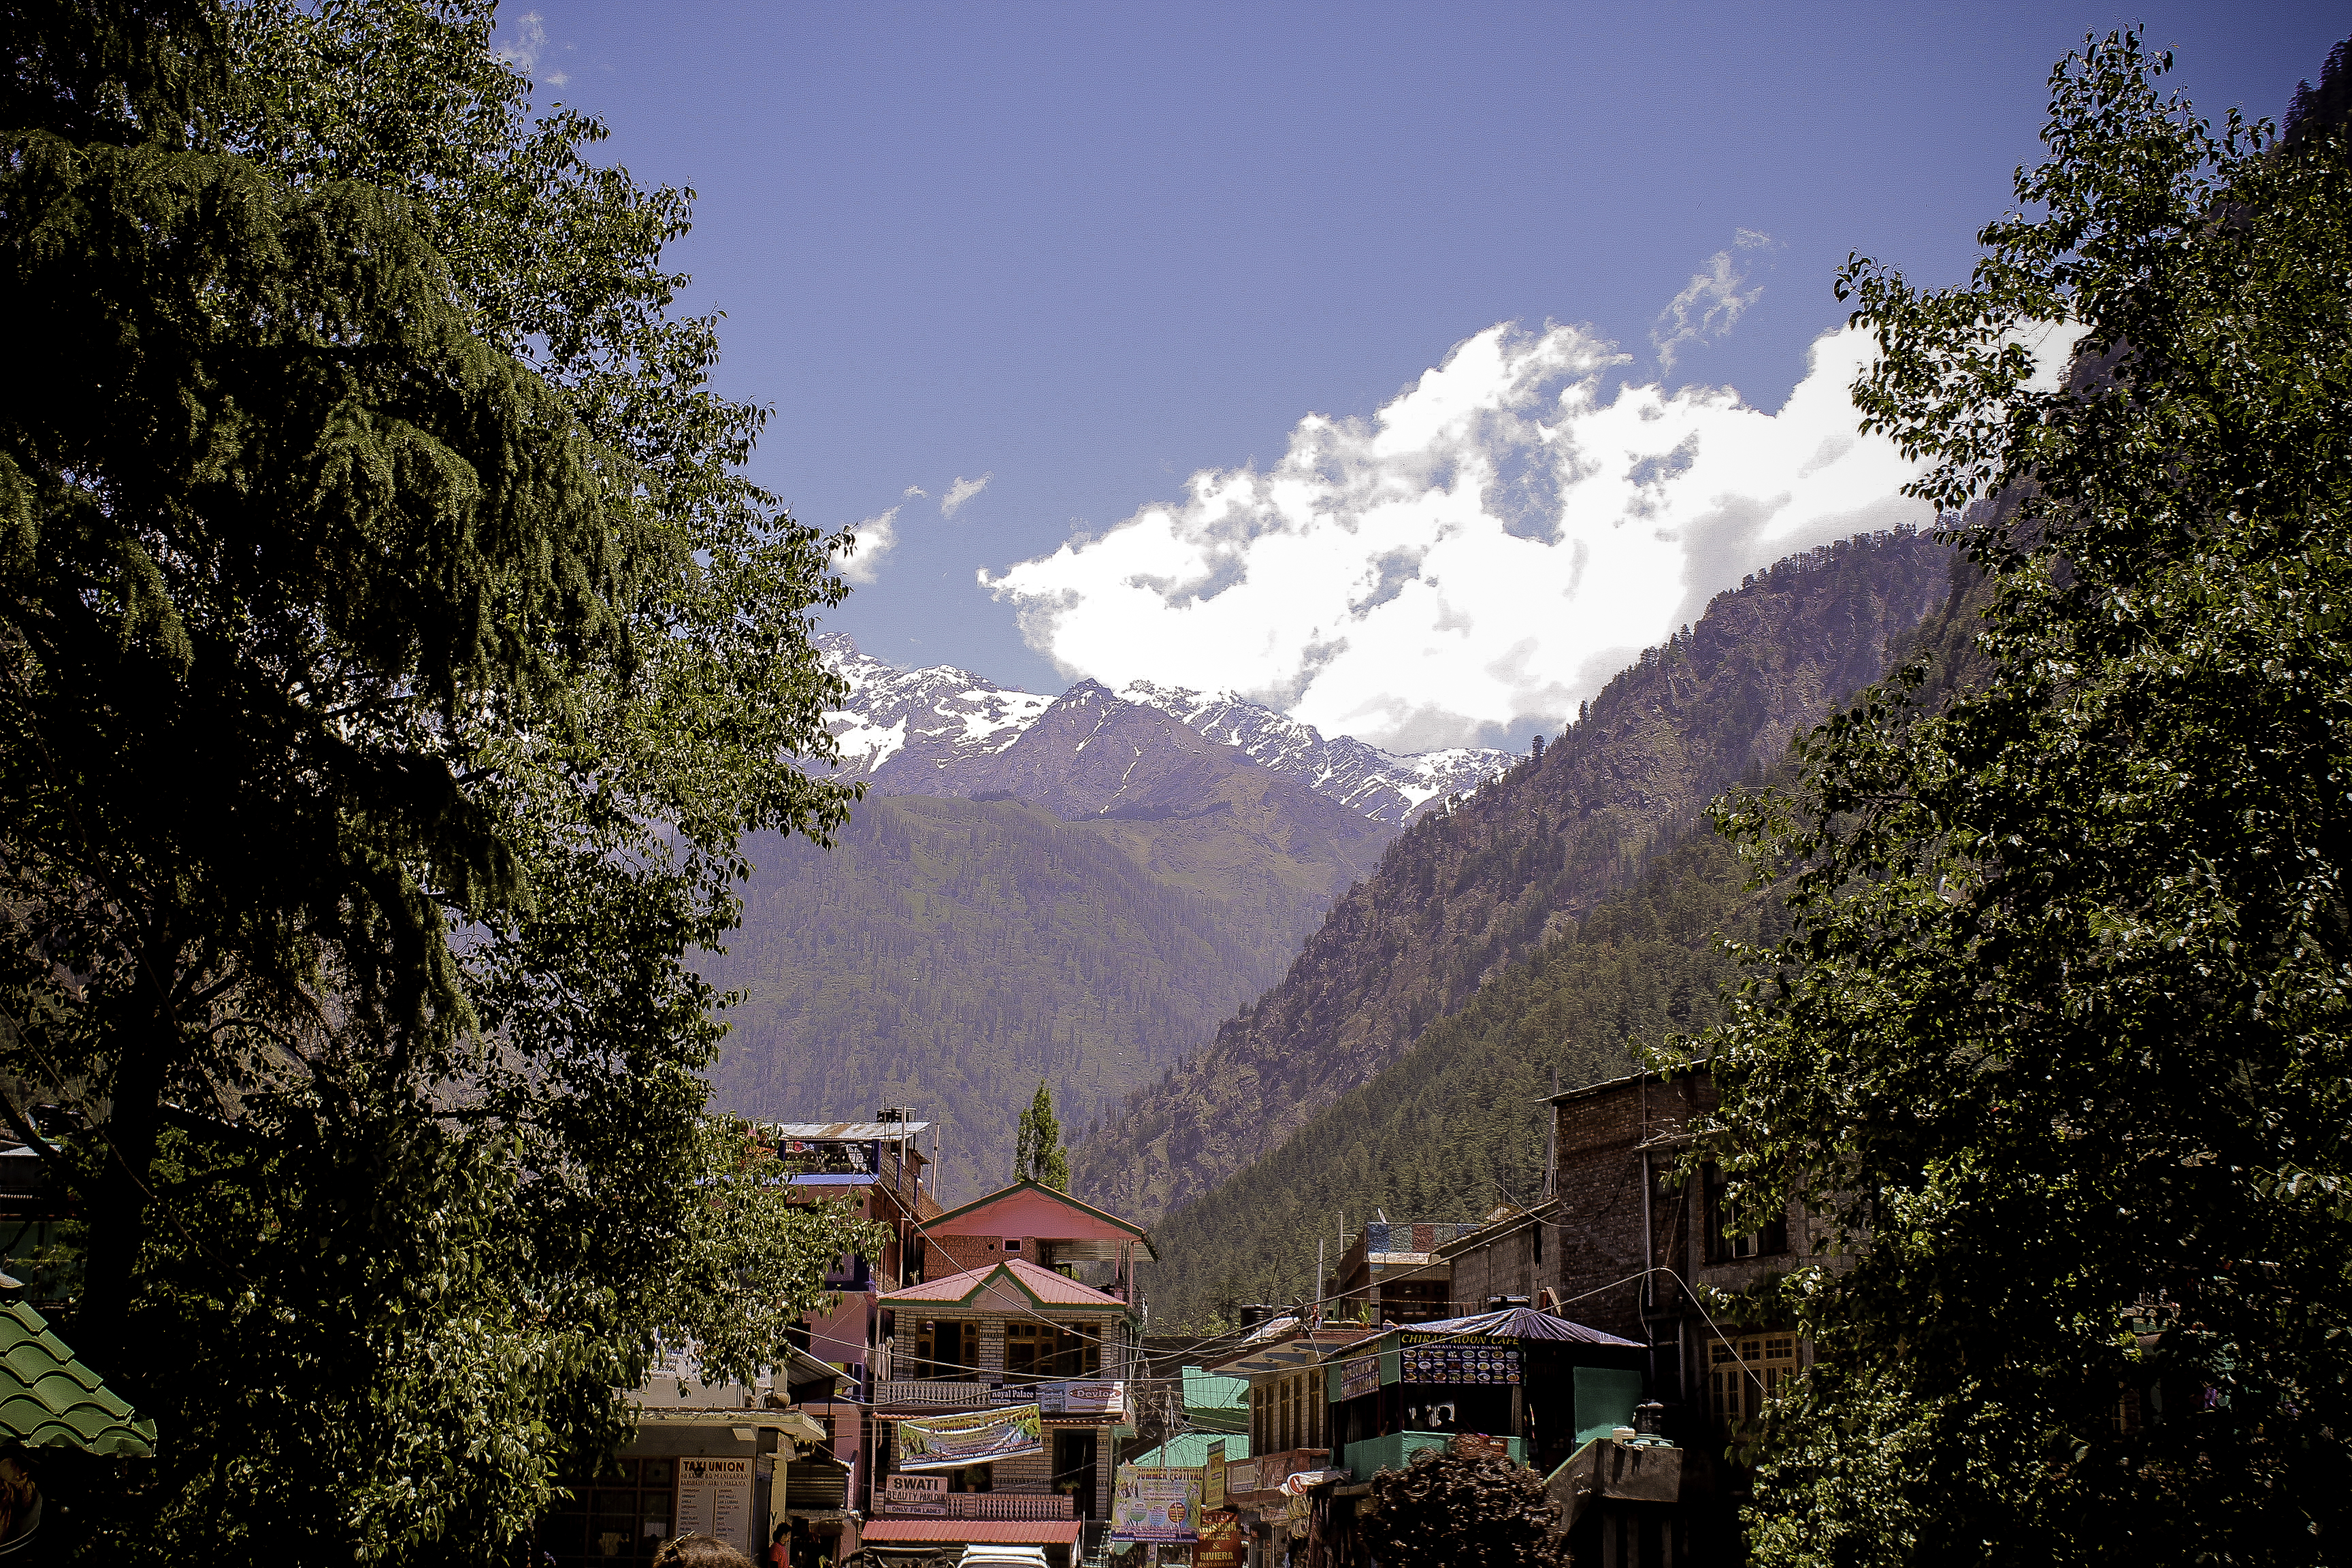 A beautiful photo of Kasol in the Parvati valley